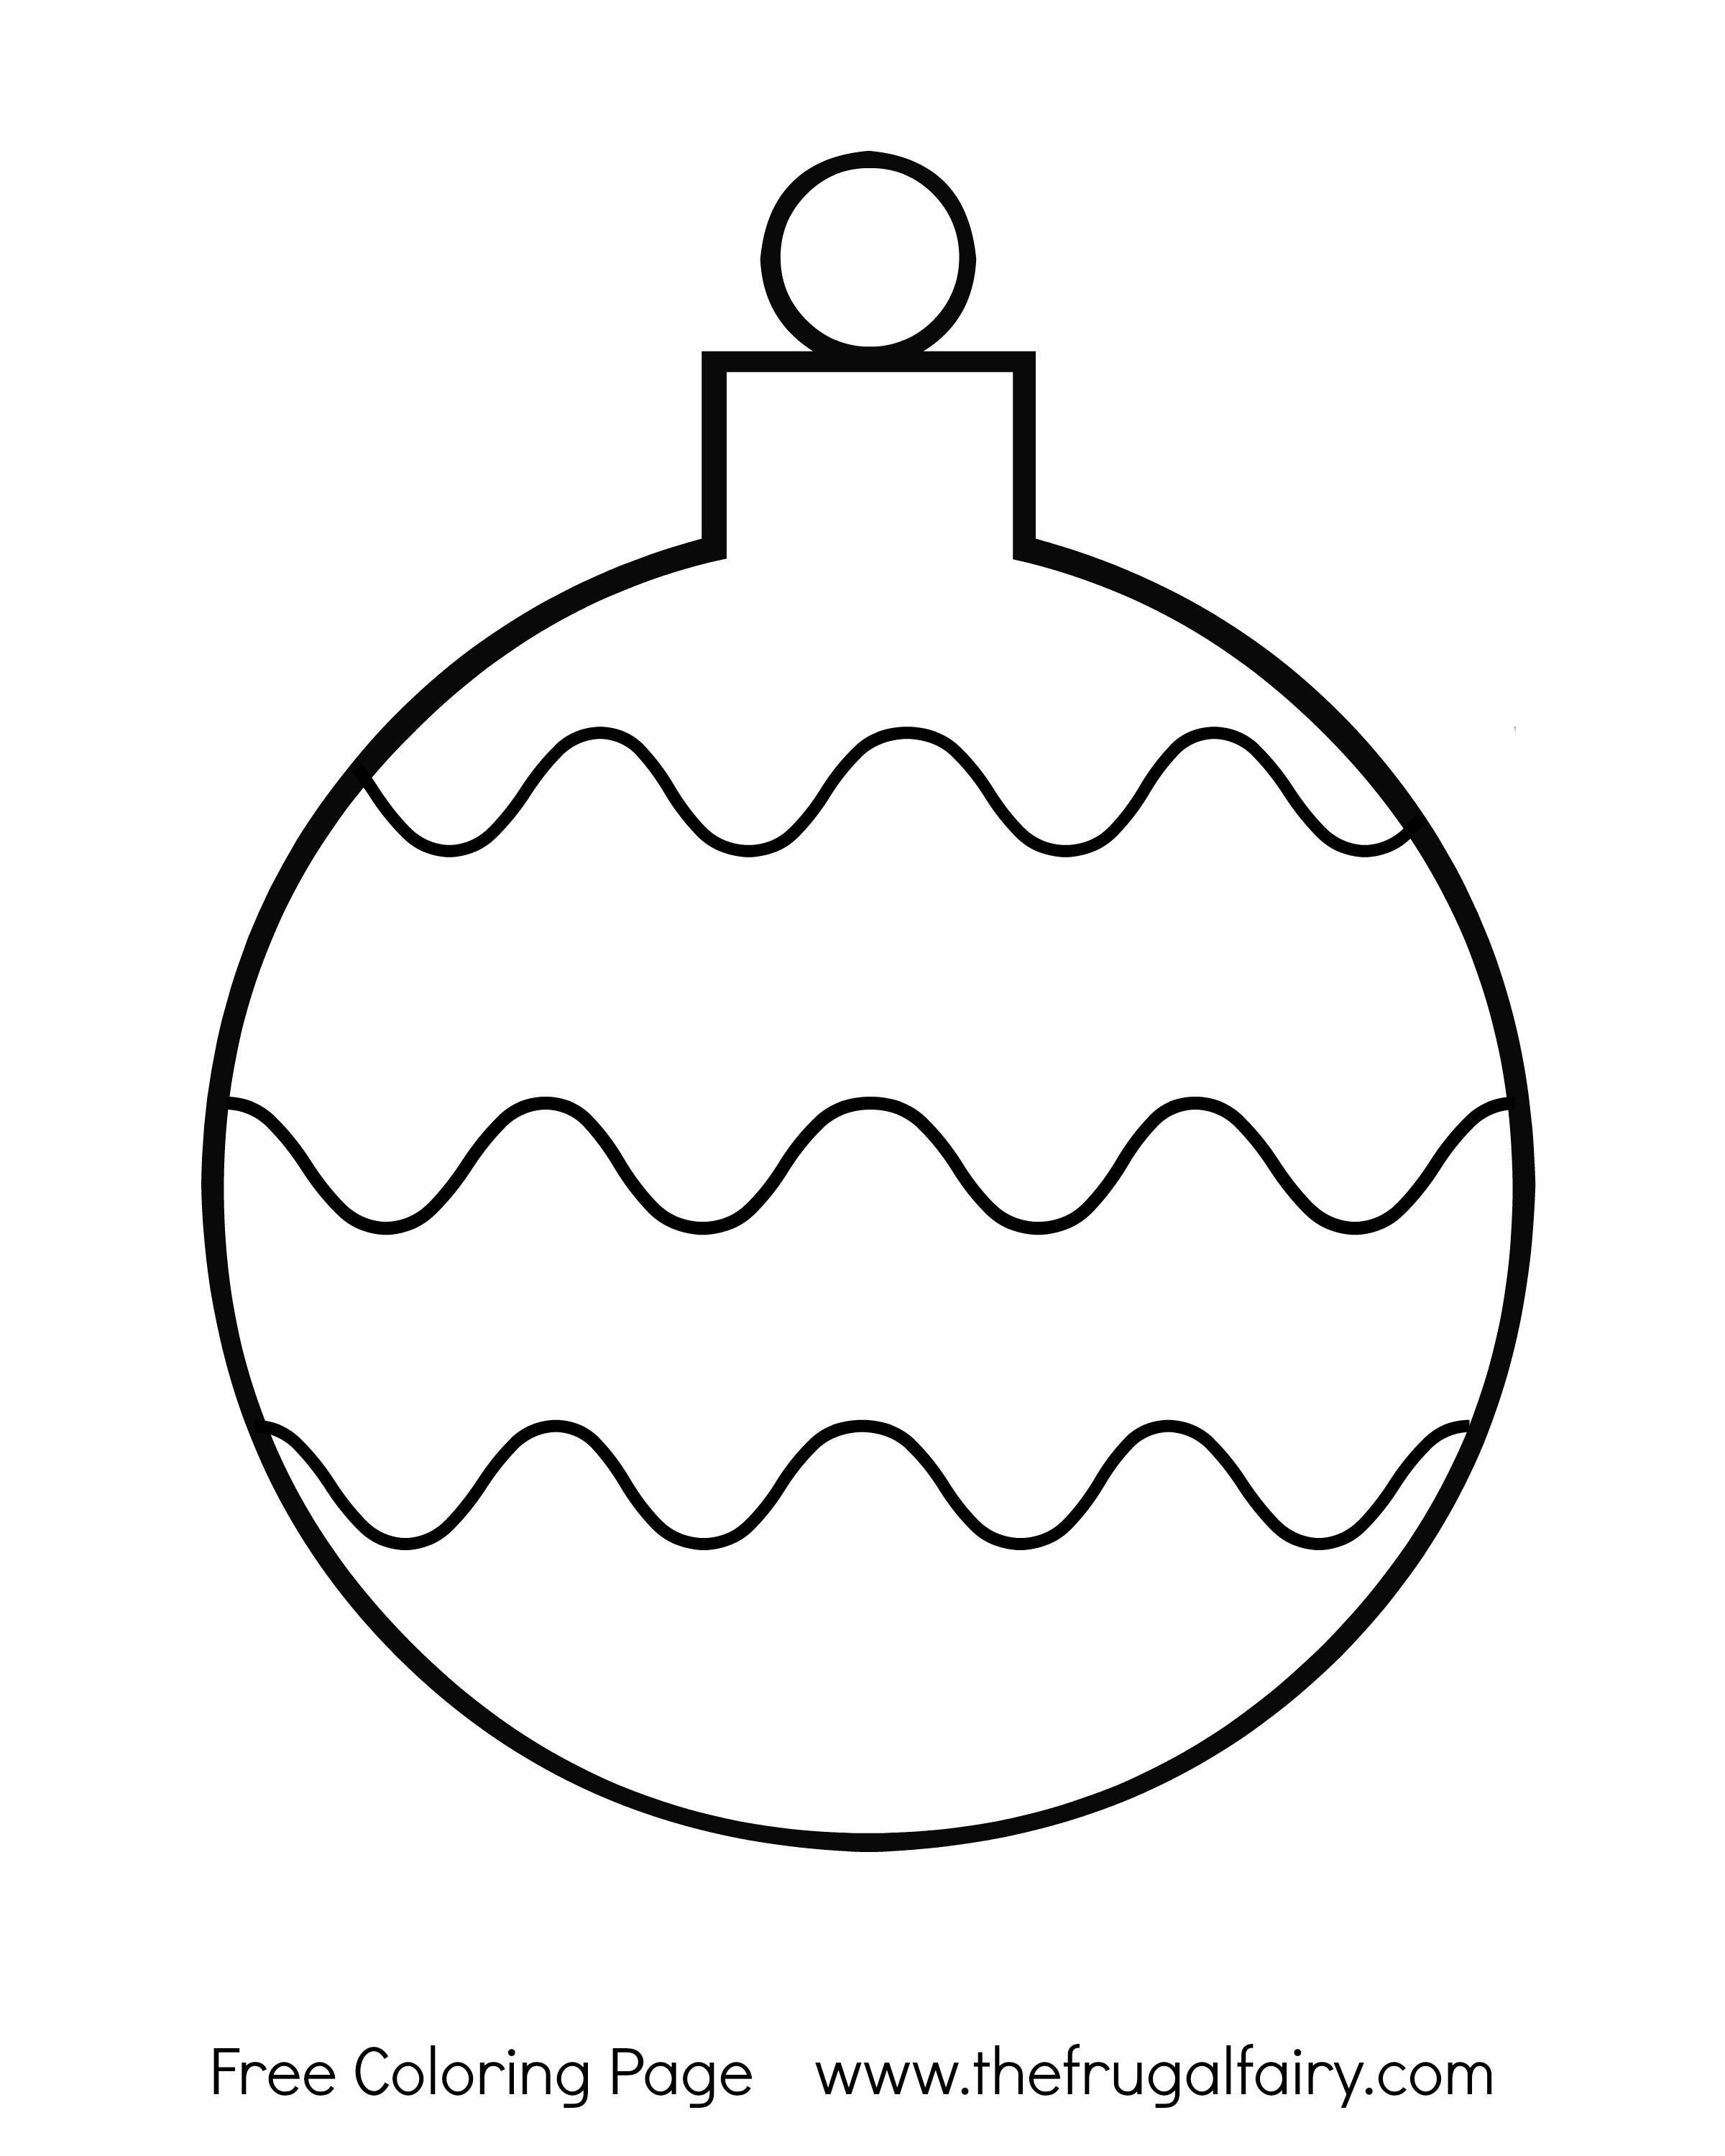 printable-ornament-coloring-pages-at-getcolorings-free-printable-colorings-pages-to-print